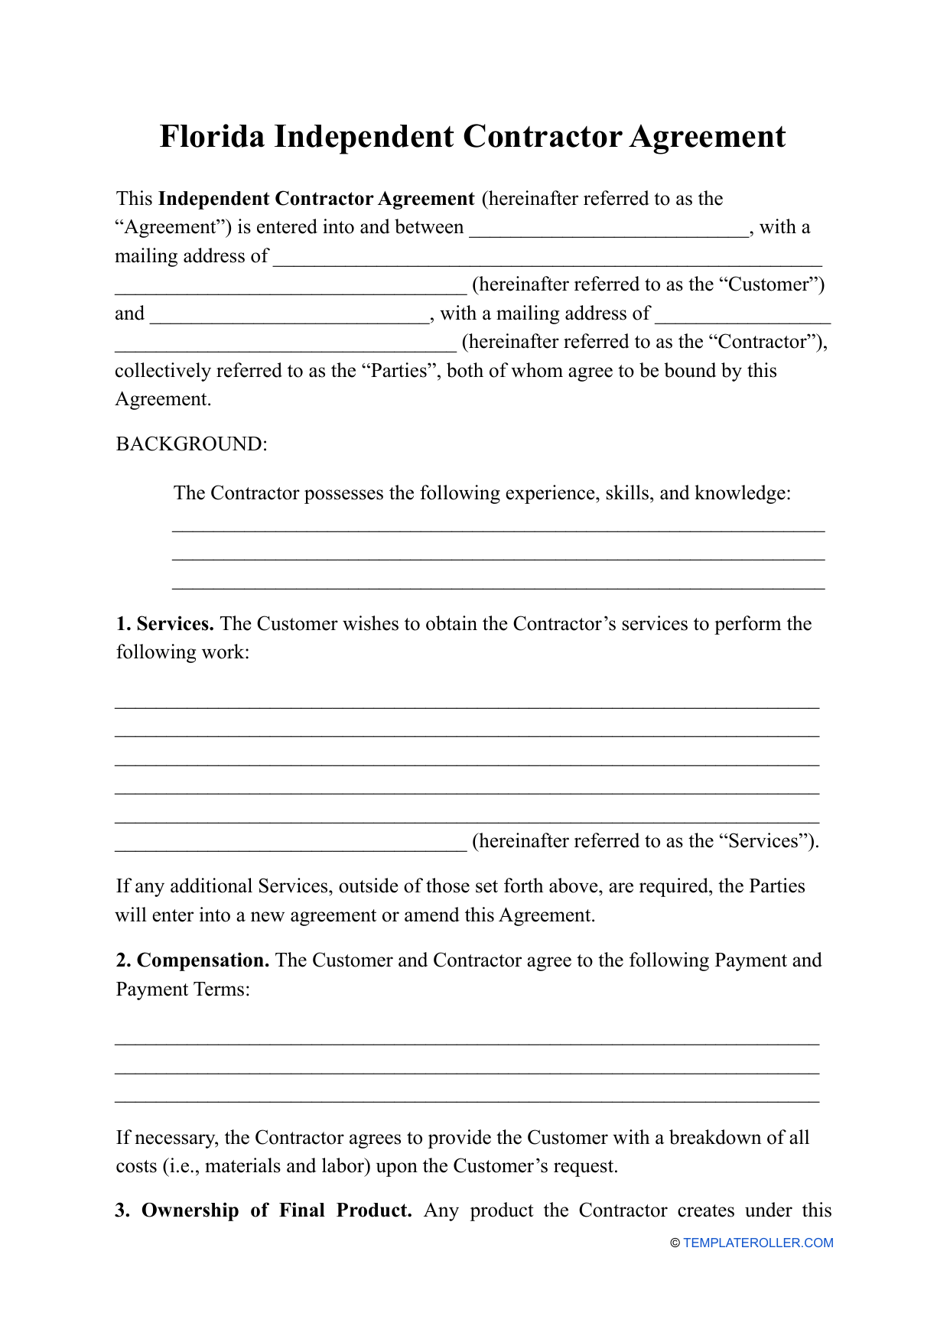 Independent Contractor Agreement Template - Florida, Page 1